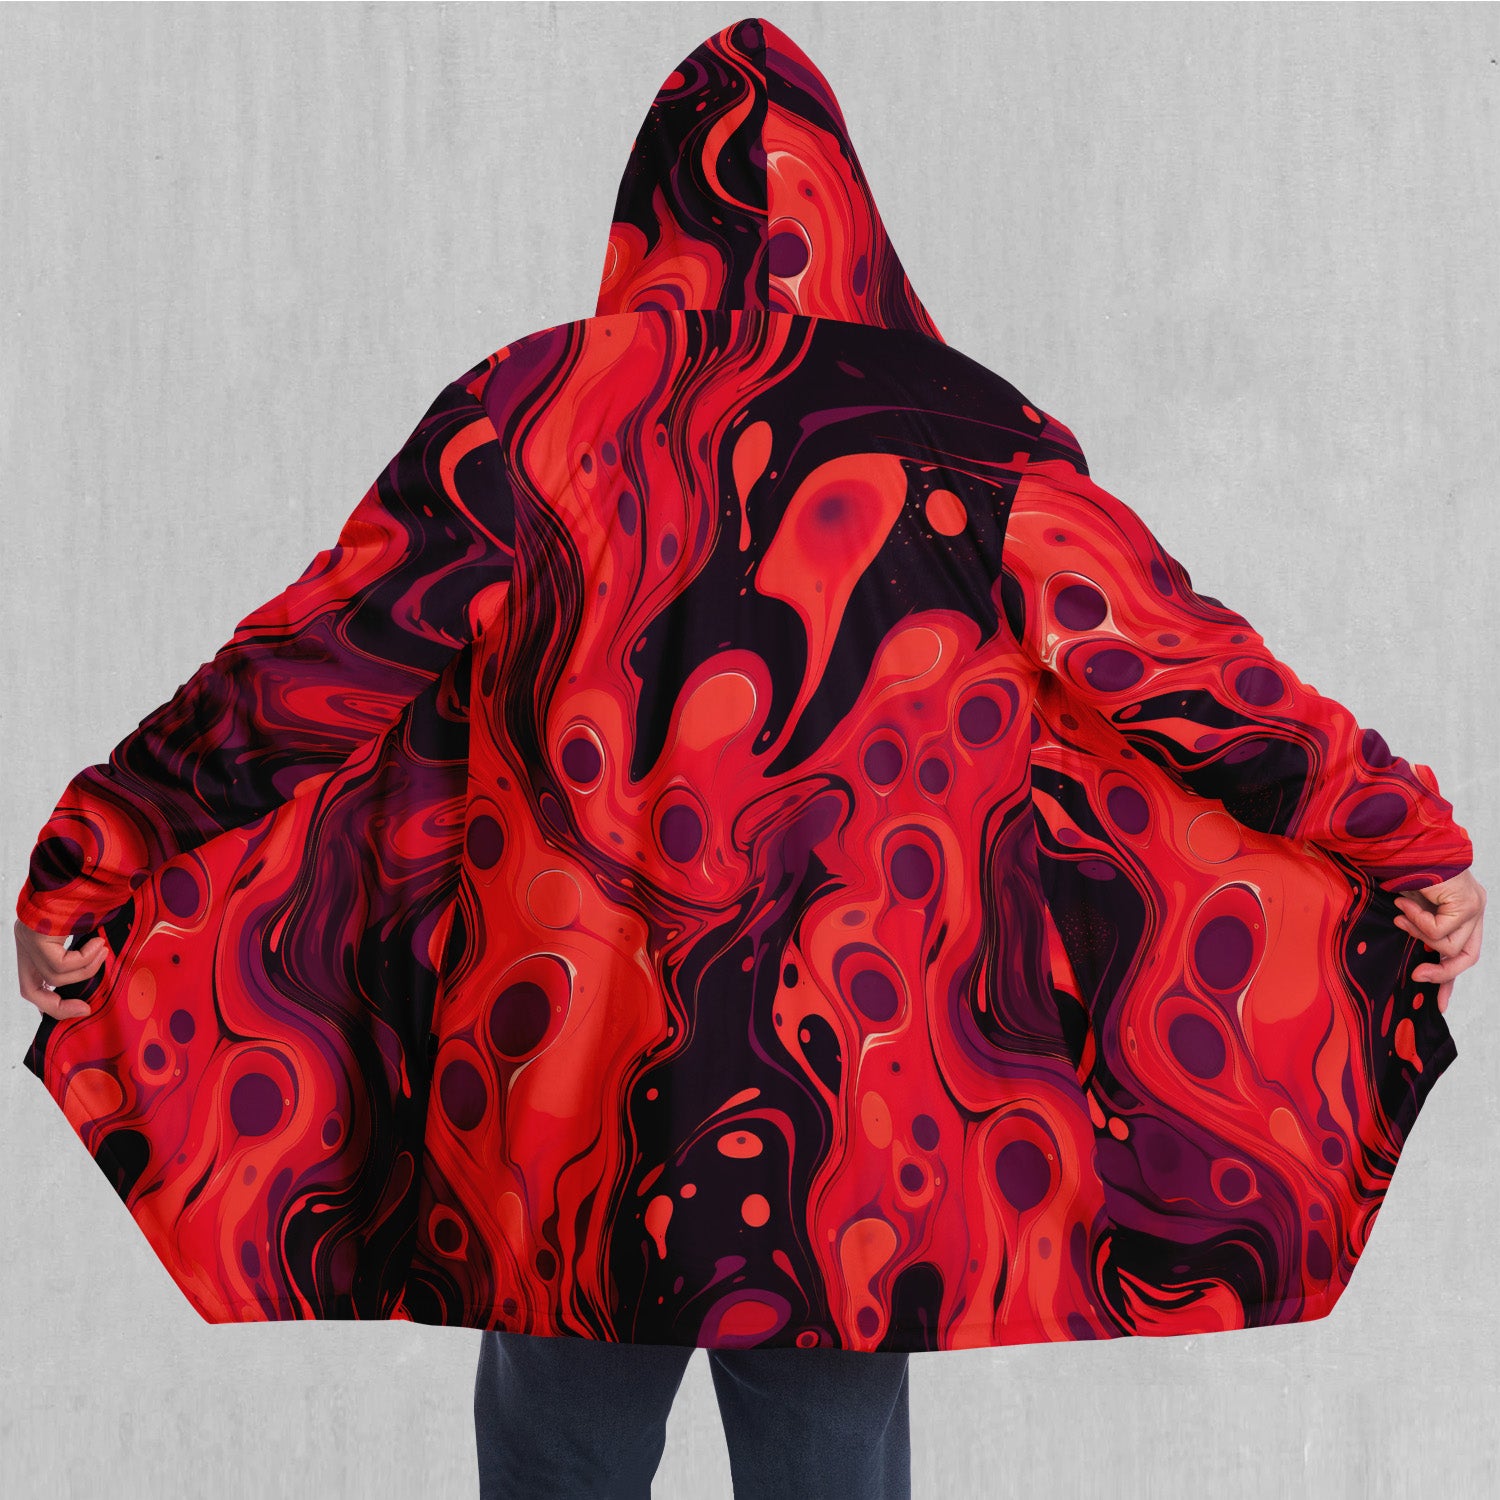 Psychedelic Cloaks